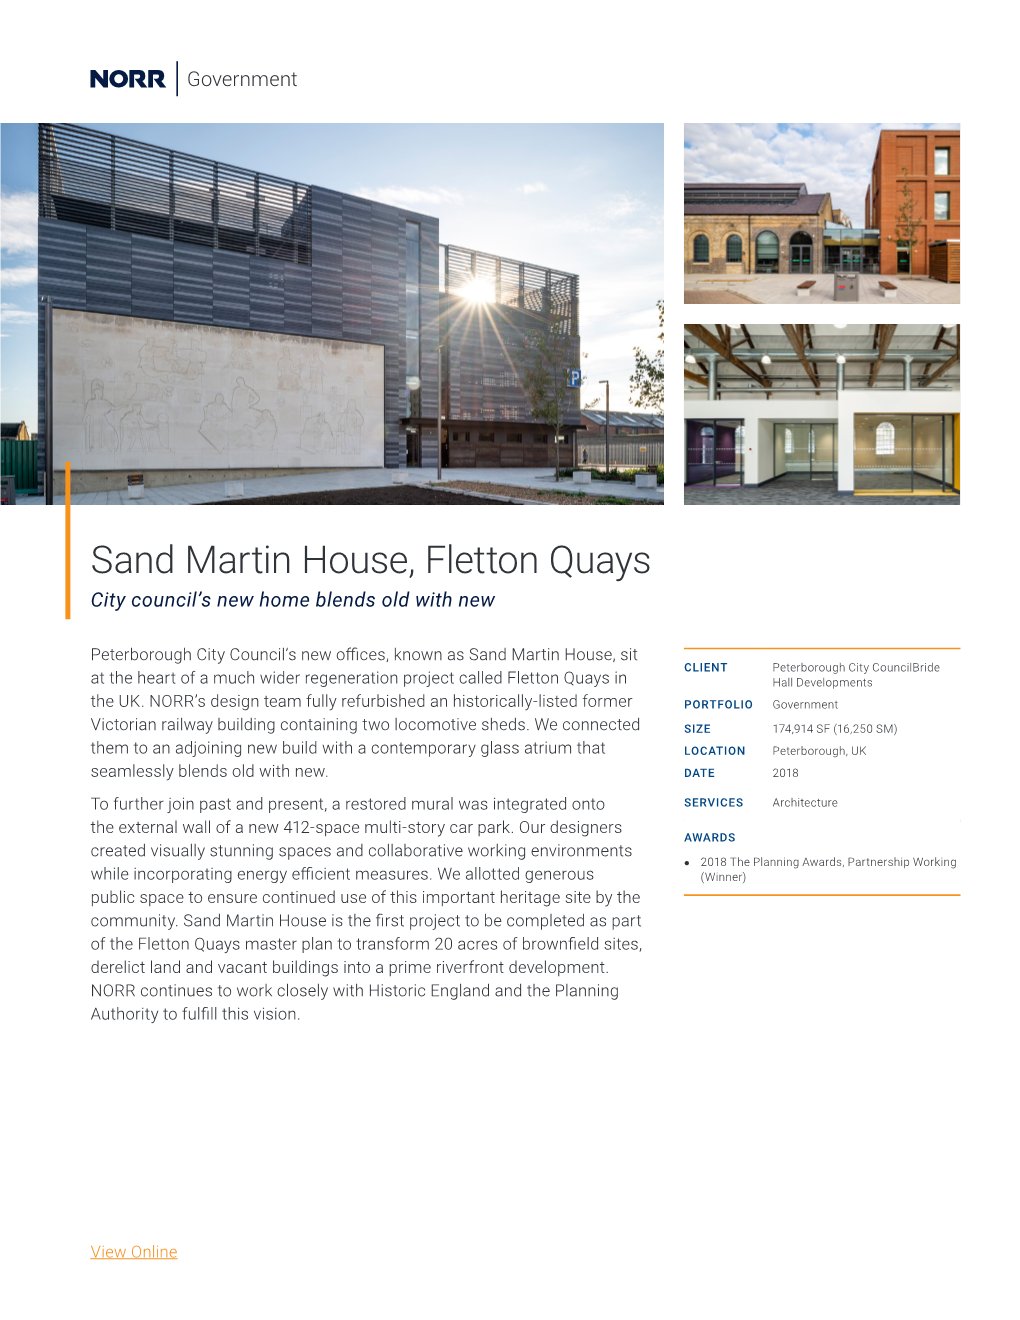 Sand Martin House, Fletton Quays City Council’S New Home Blends Old with New